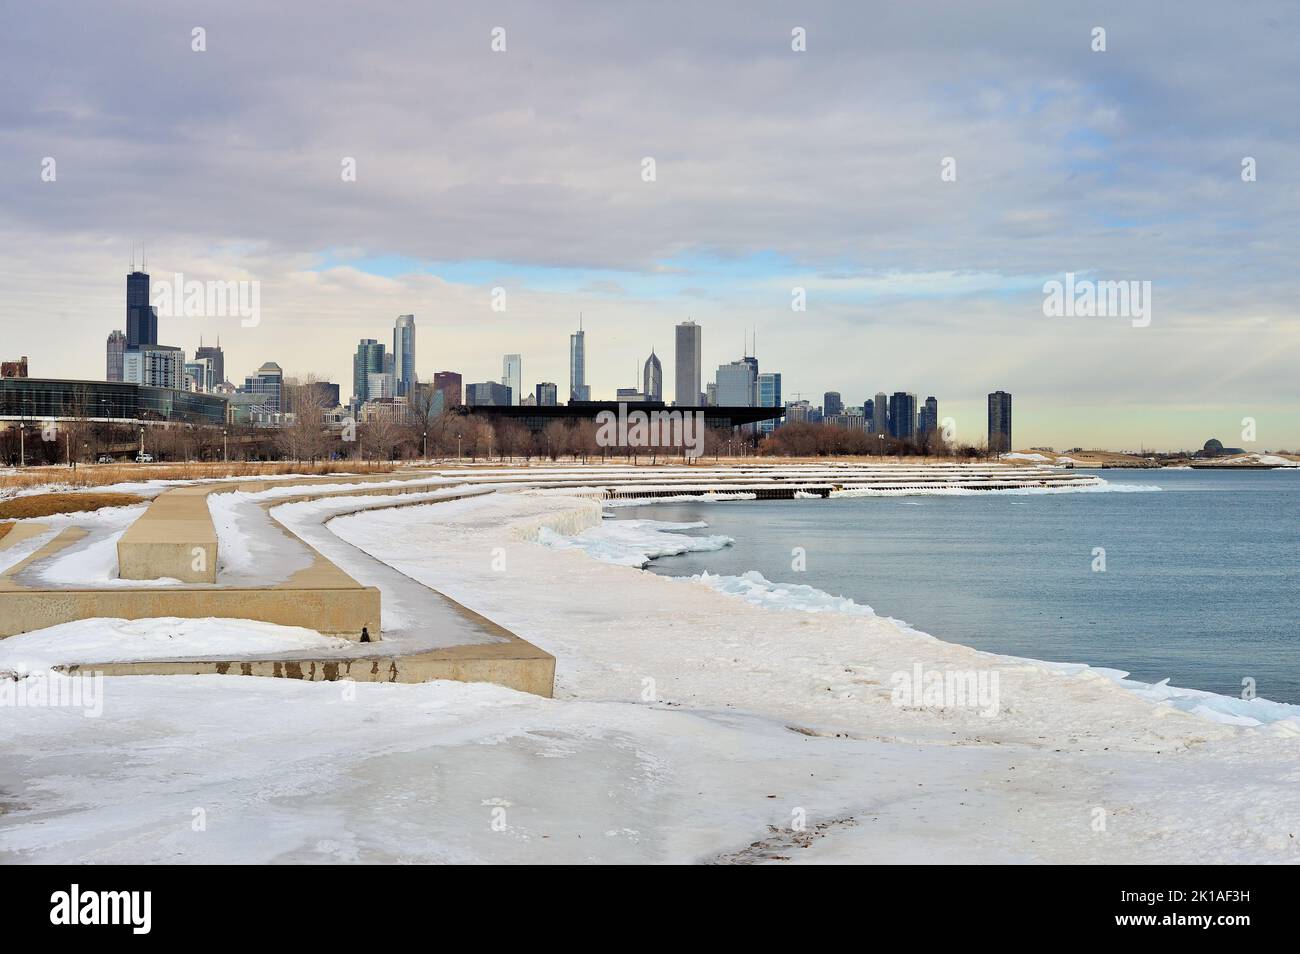 Ice and snow cling to the lake wall along Lake Michigan in Chicago in late February on a day filled with ominus clouds. Past the frozen scene in the n Stock Photo